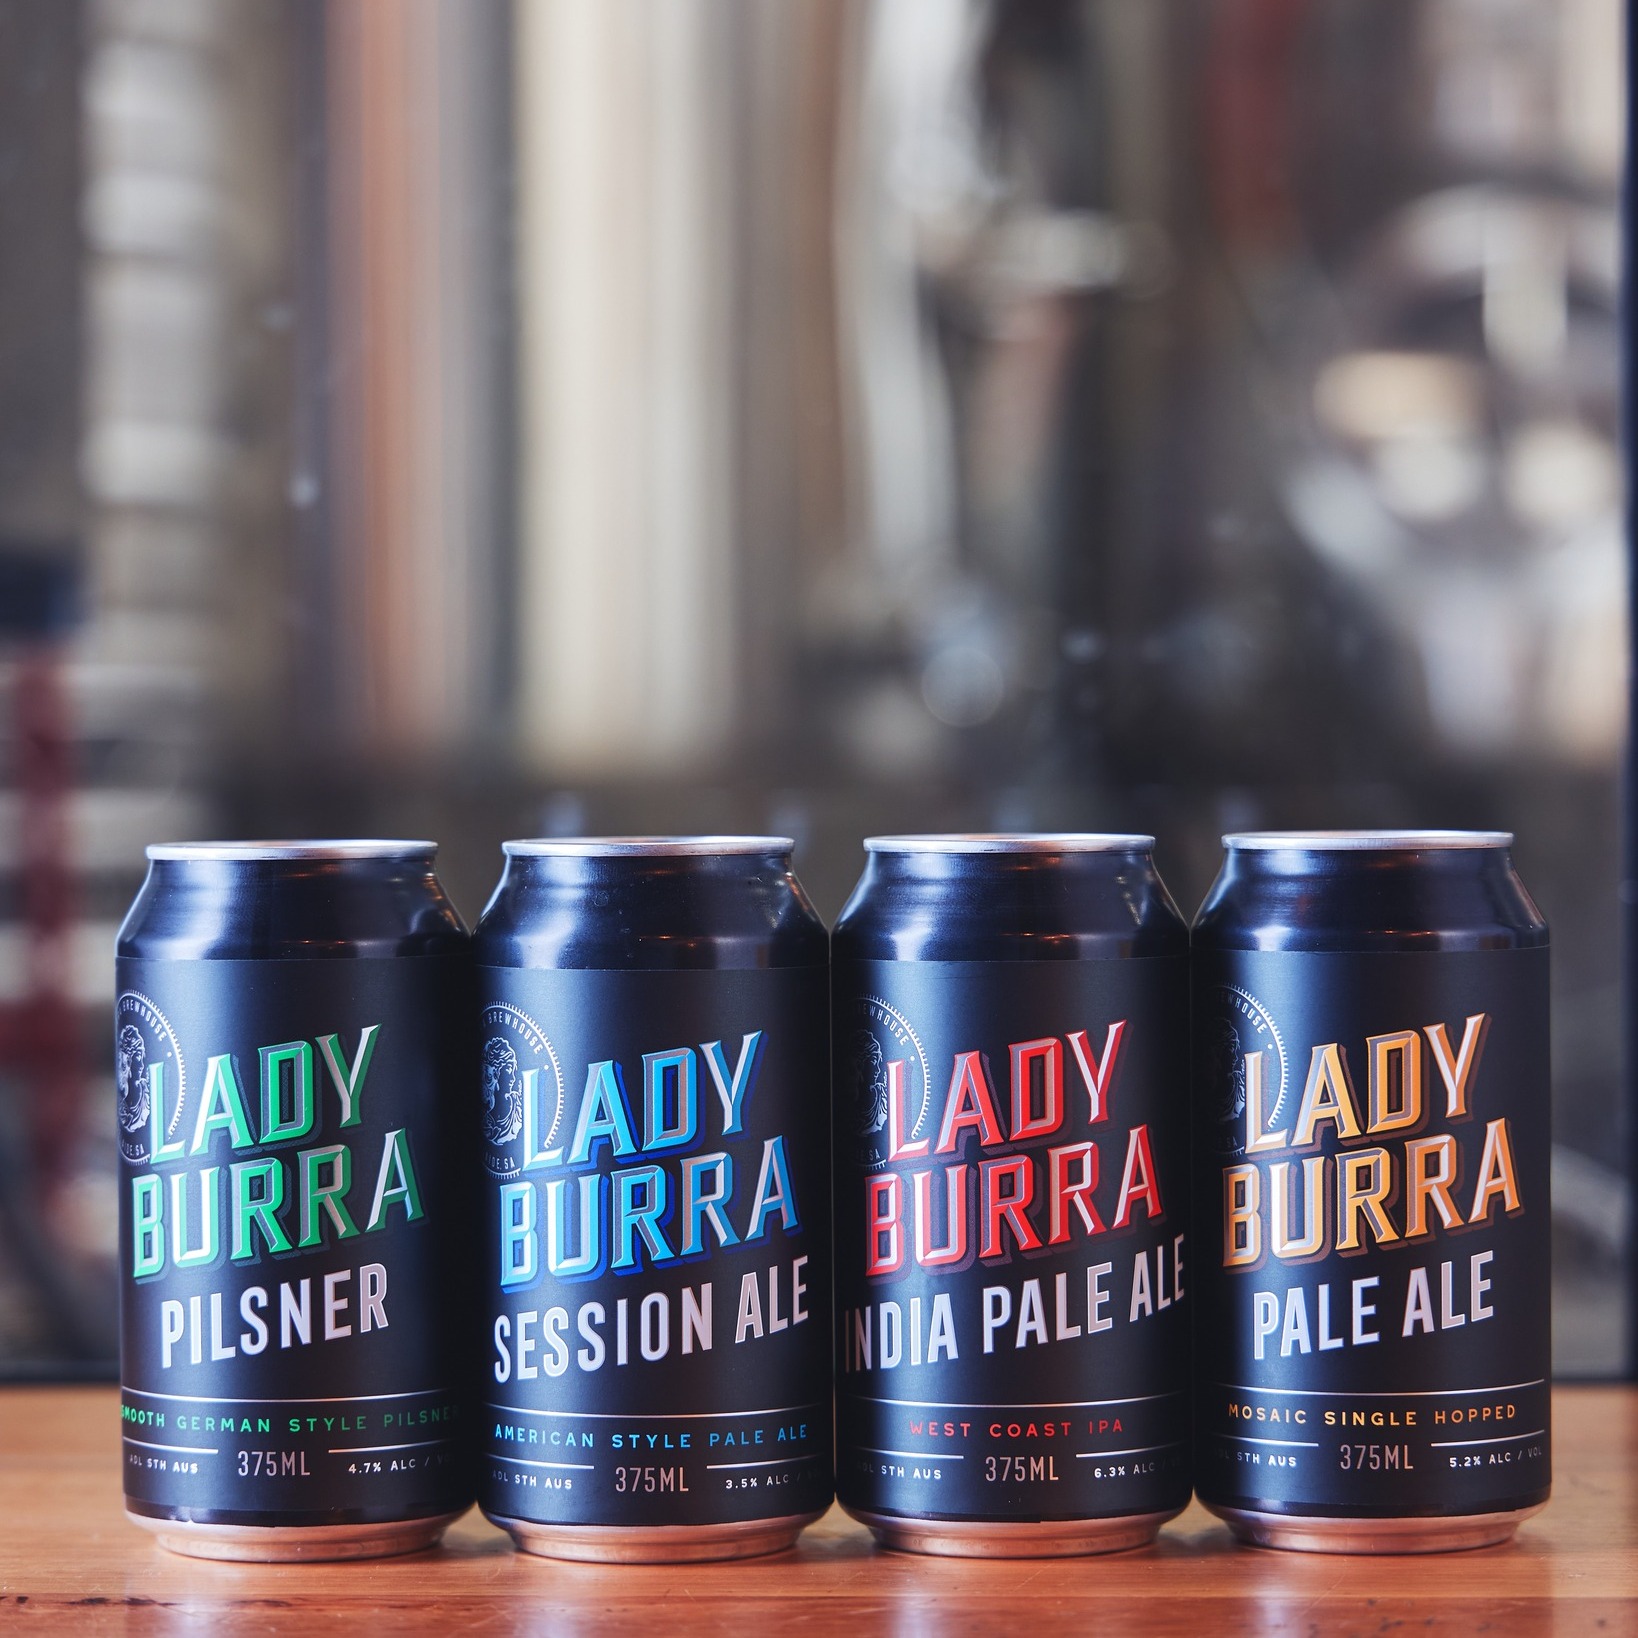 WIN 2 Tickets to the Lady Burra Brewery Tour Experience PLUS a $150 Food and Drink Voucher!